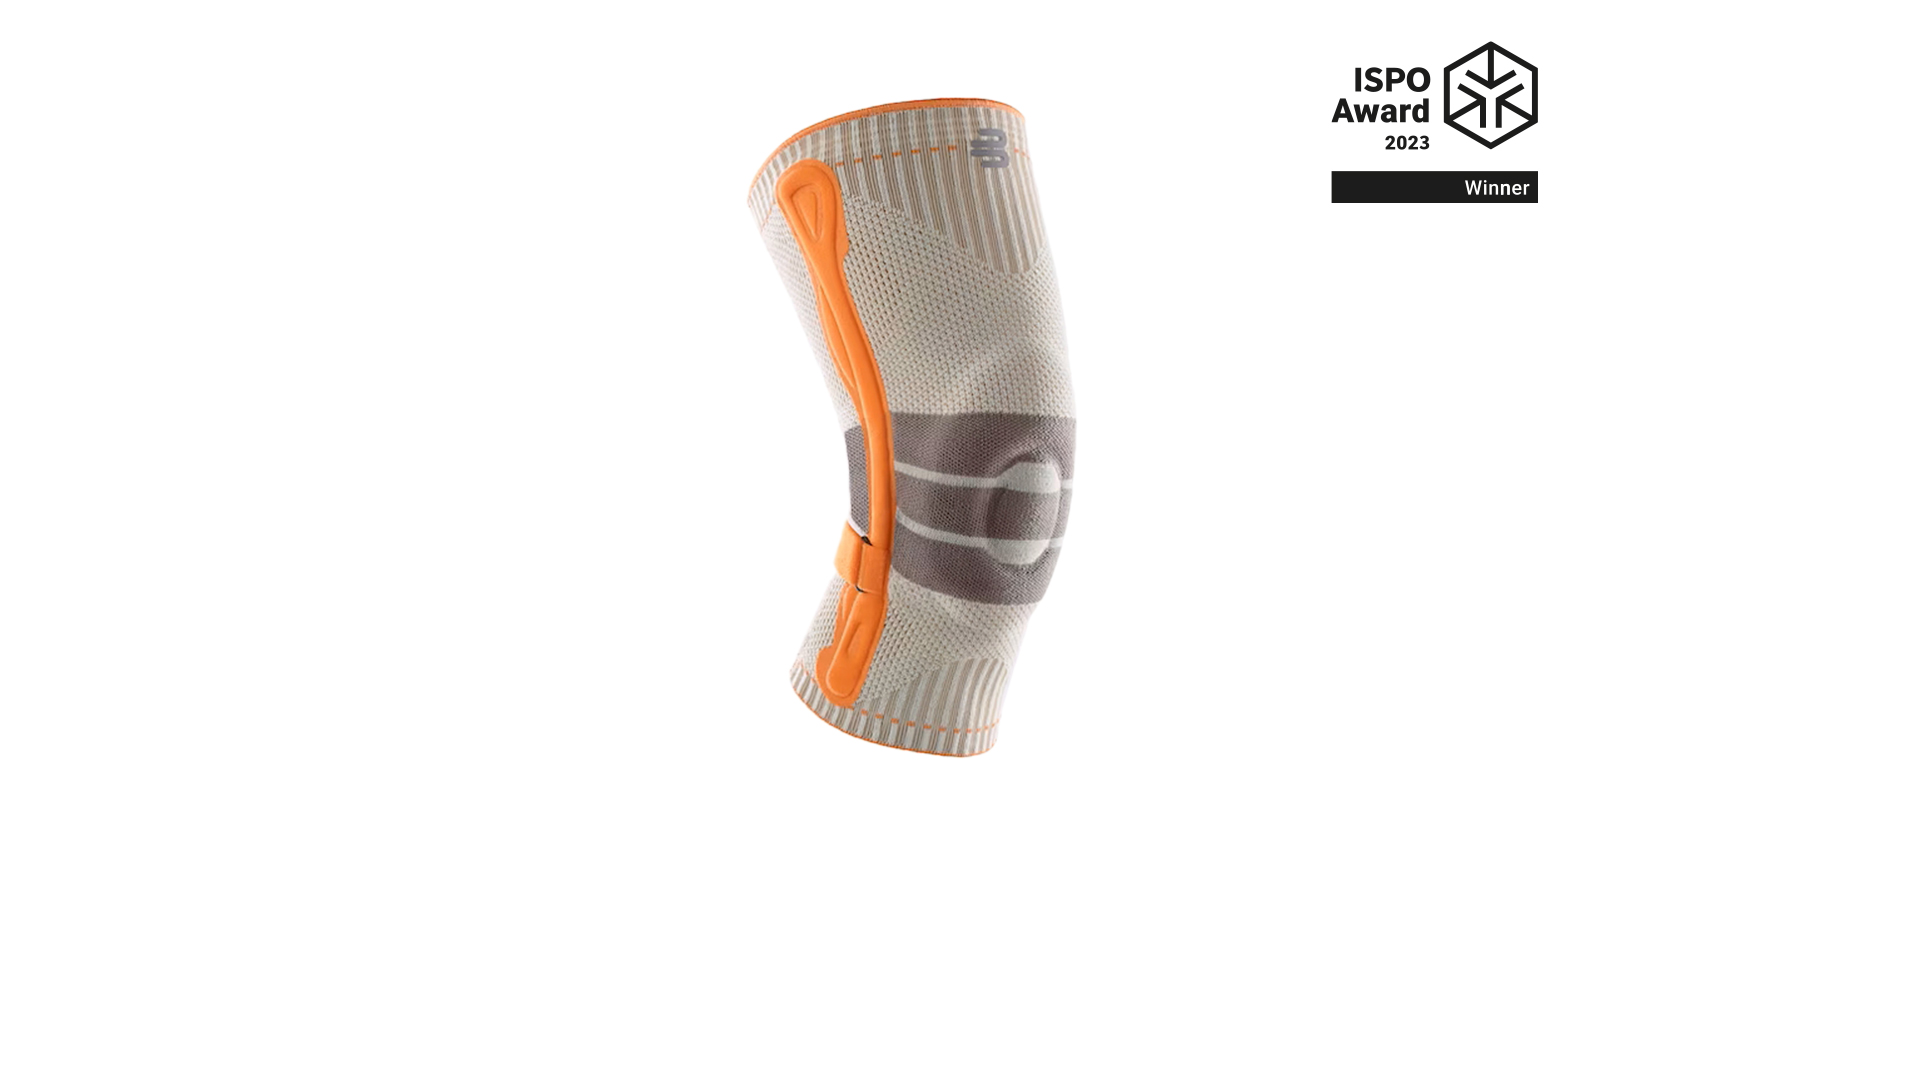 The Bauerfeind Sports Outdoor Knee Support won the 2023 ISPO Award.